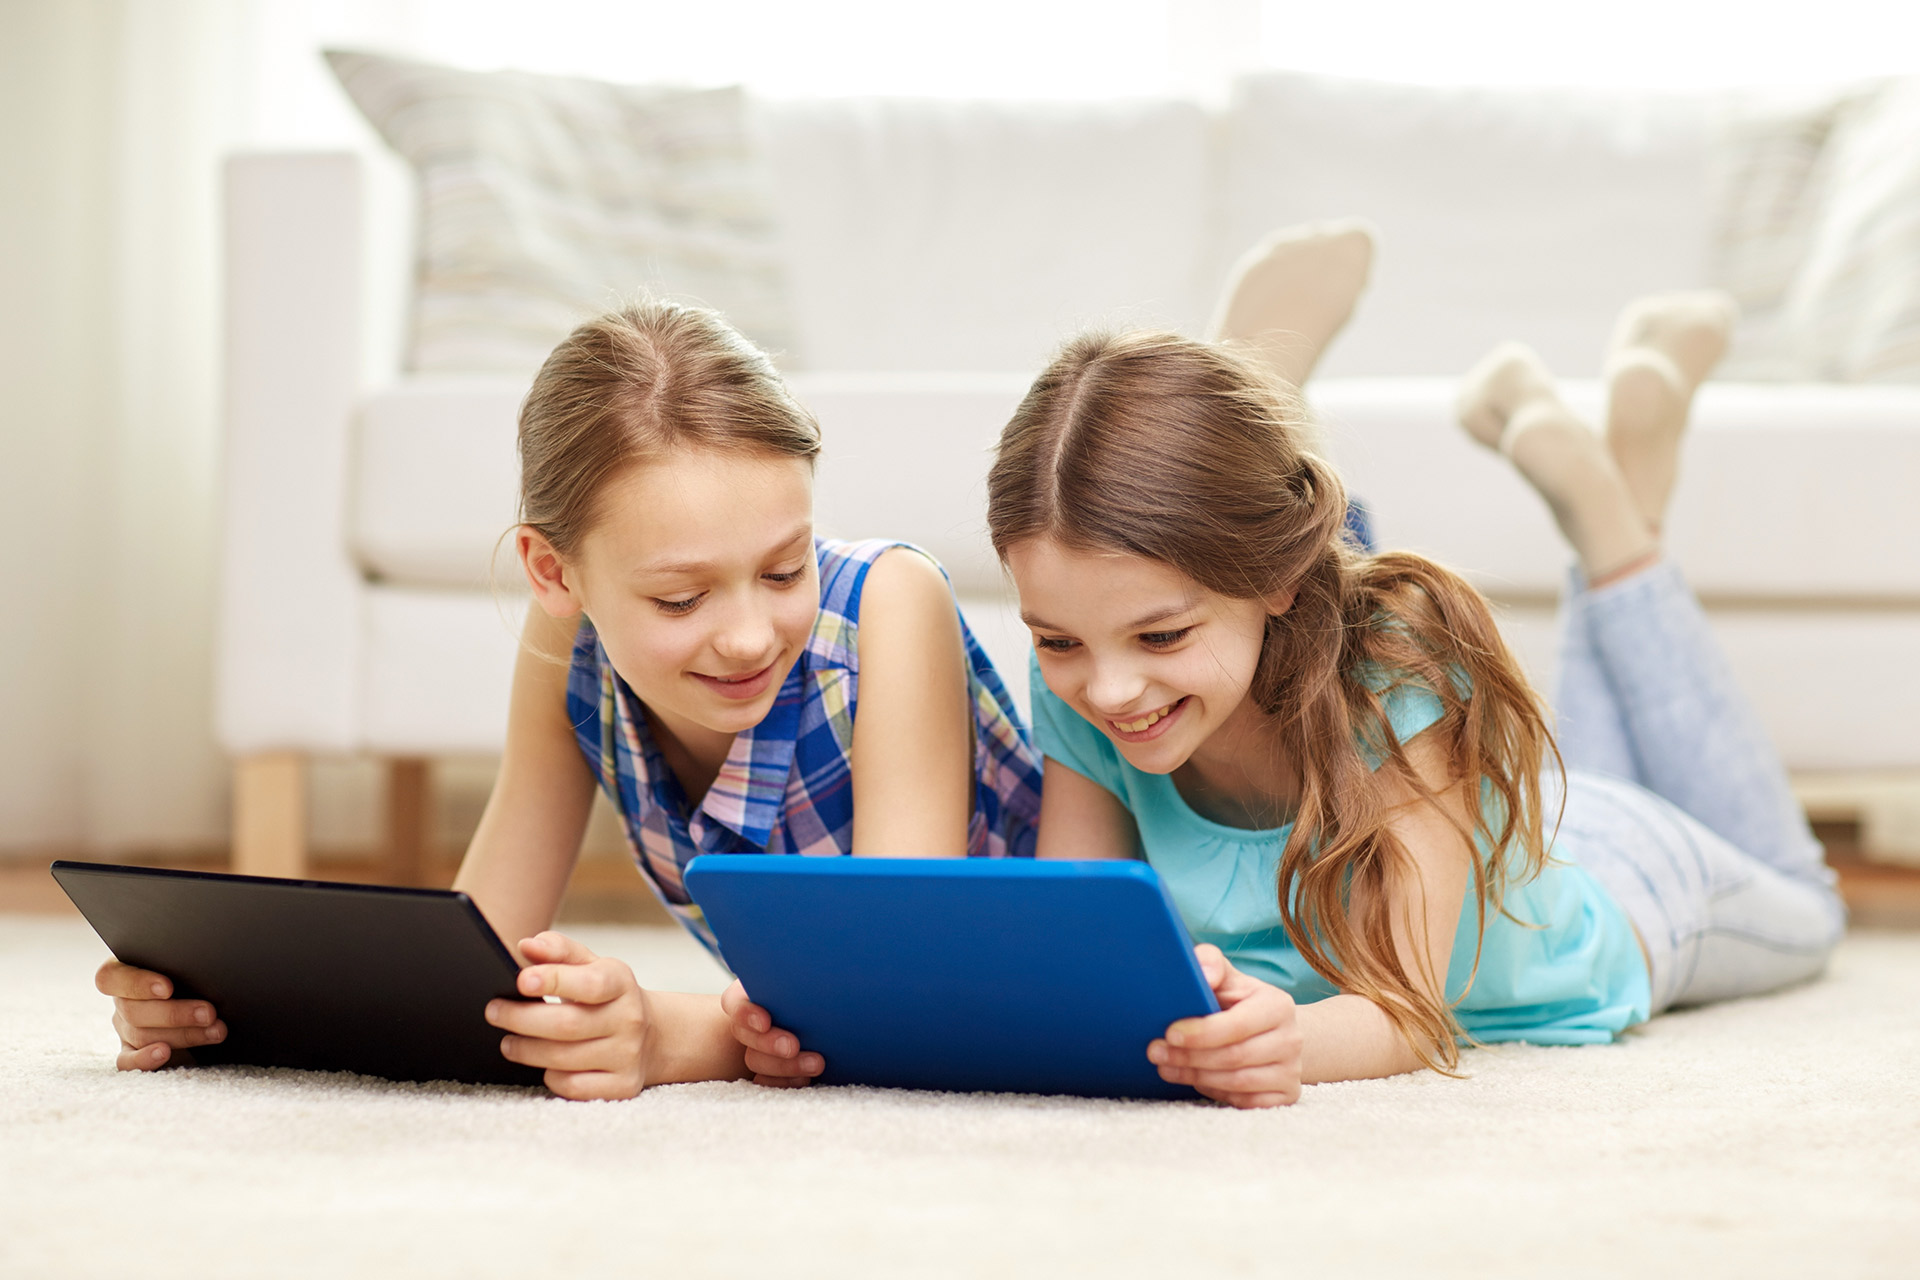 Children's Screen Time: Striking a Balance in the Digital Age